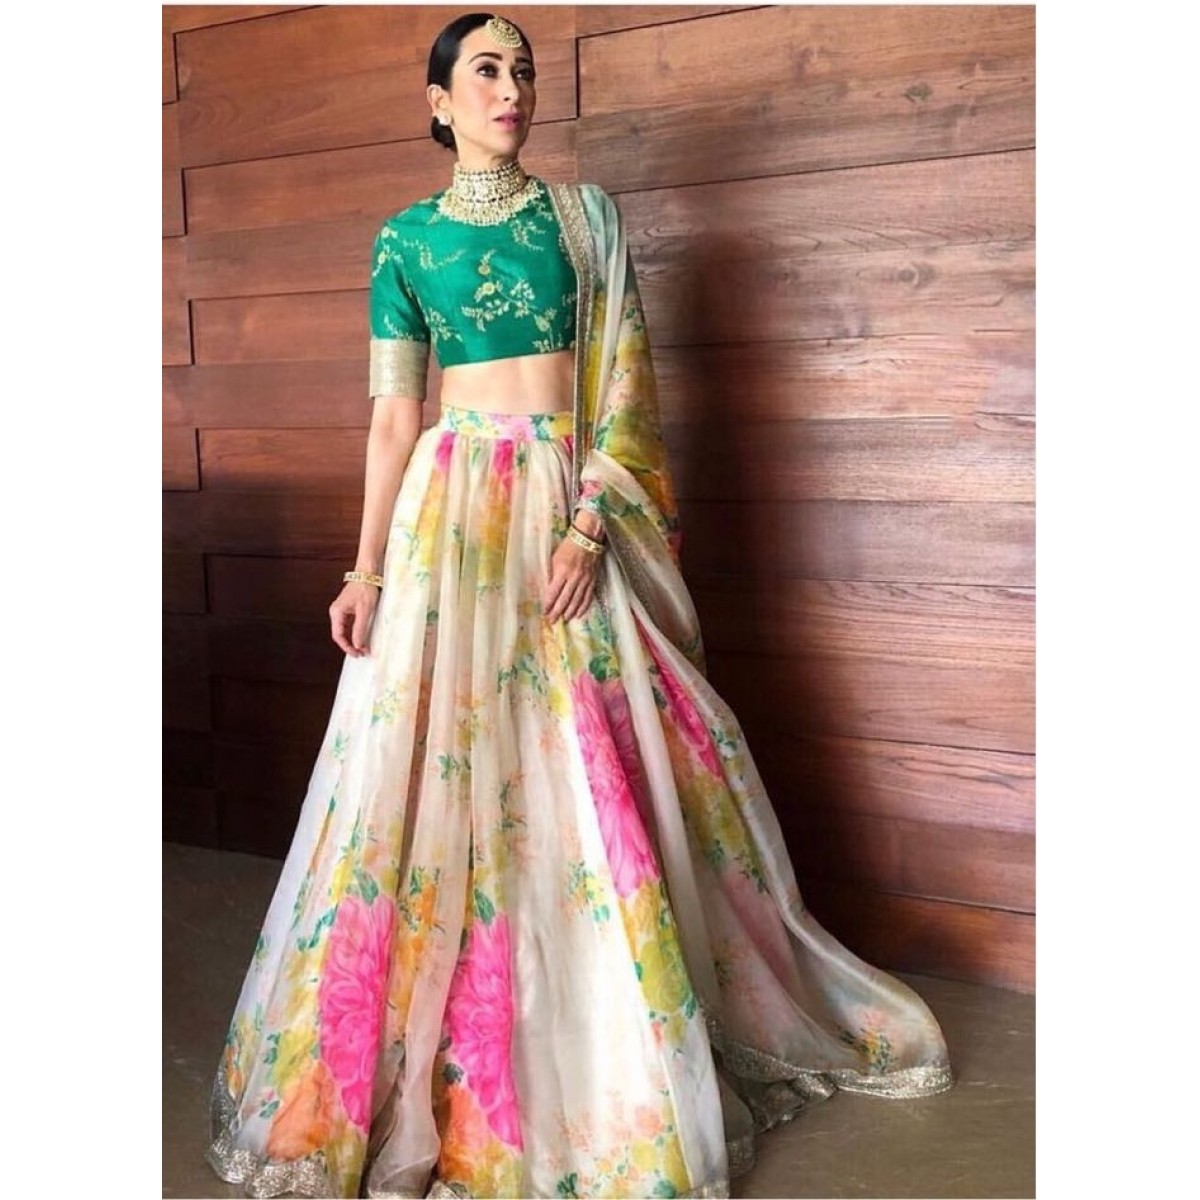 Yellow Self Design Semi Stitched Lehenga Choli | 9gmart Most Popular  American Fashion Brands, Mobiles, Smartphones, Smart TV, Laptops, Smart  Watches and Luxury Fashion Offers, Deals, Discounts, Coupons at 9gmart  Online Shopping